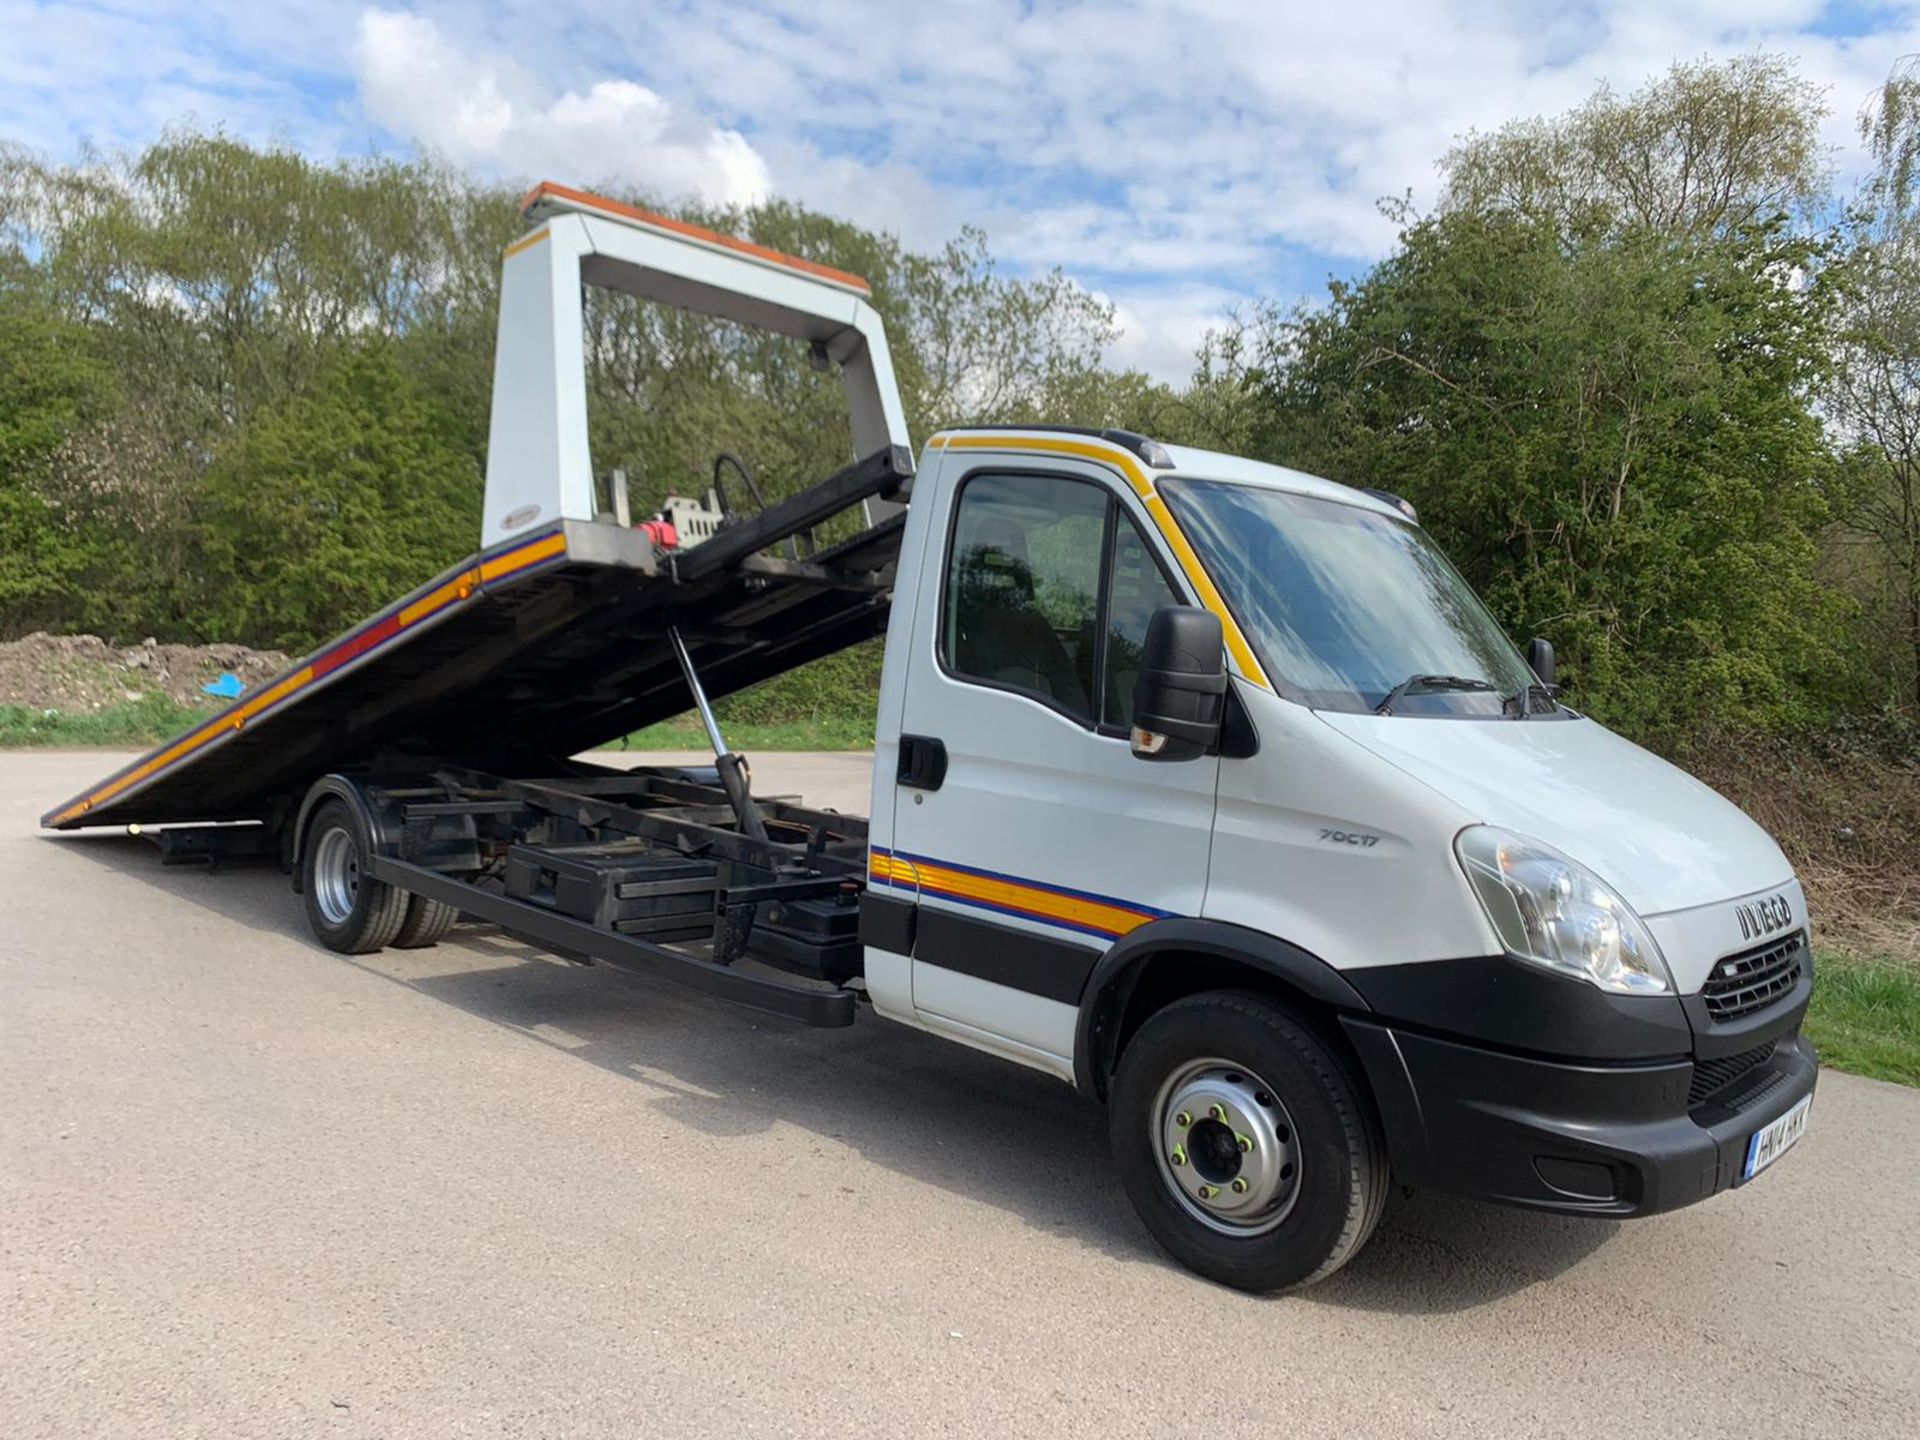 2014 IVECO DAILY 70C17 TILT & SLIDE RECOVERY, 3.0 DIESEL ENGINE, SHOWING 0 PREVIOUS KEEPERS - Image 2 of 20